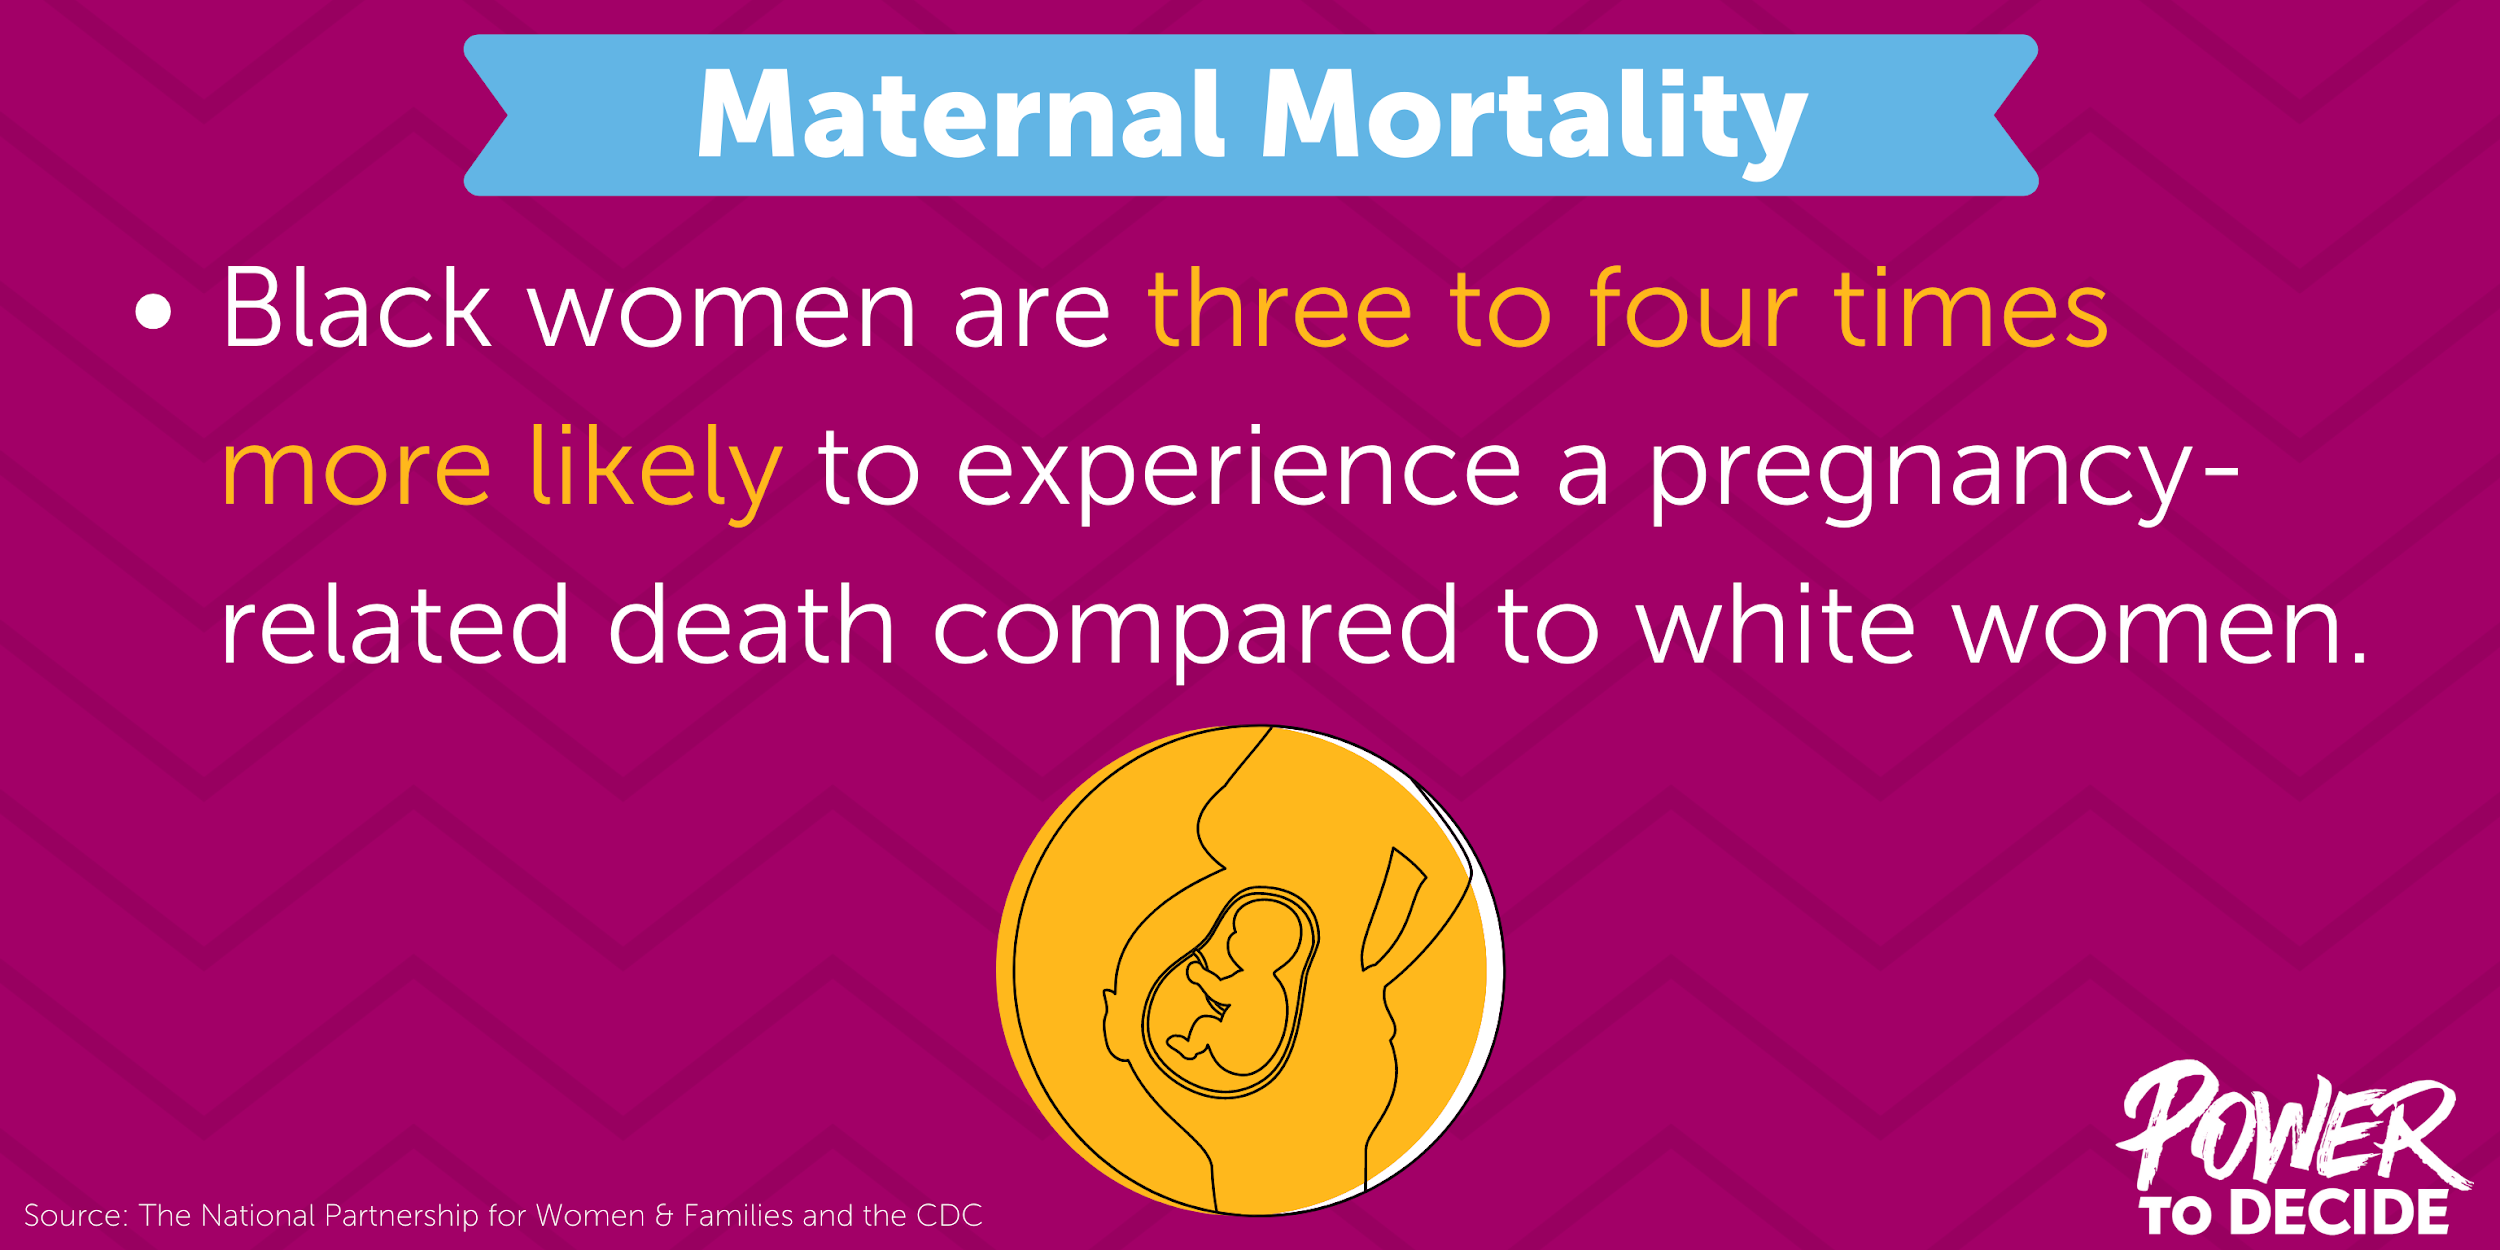 An illustration of a pregnant body and the words, "Black woman are three to four times more likely to experience a pregnancy-related death compared to white women."